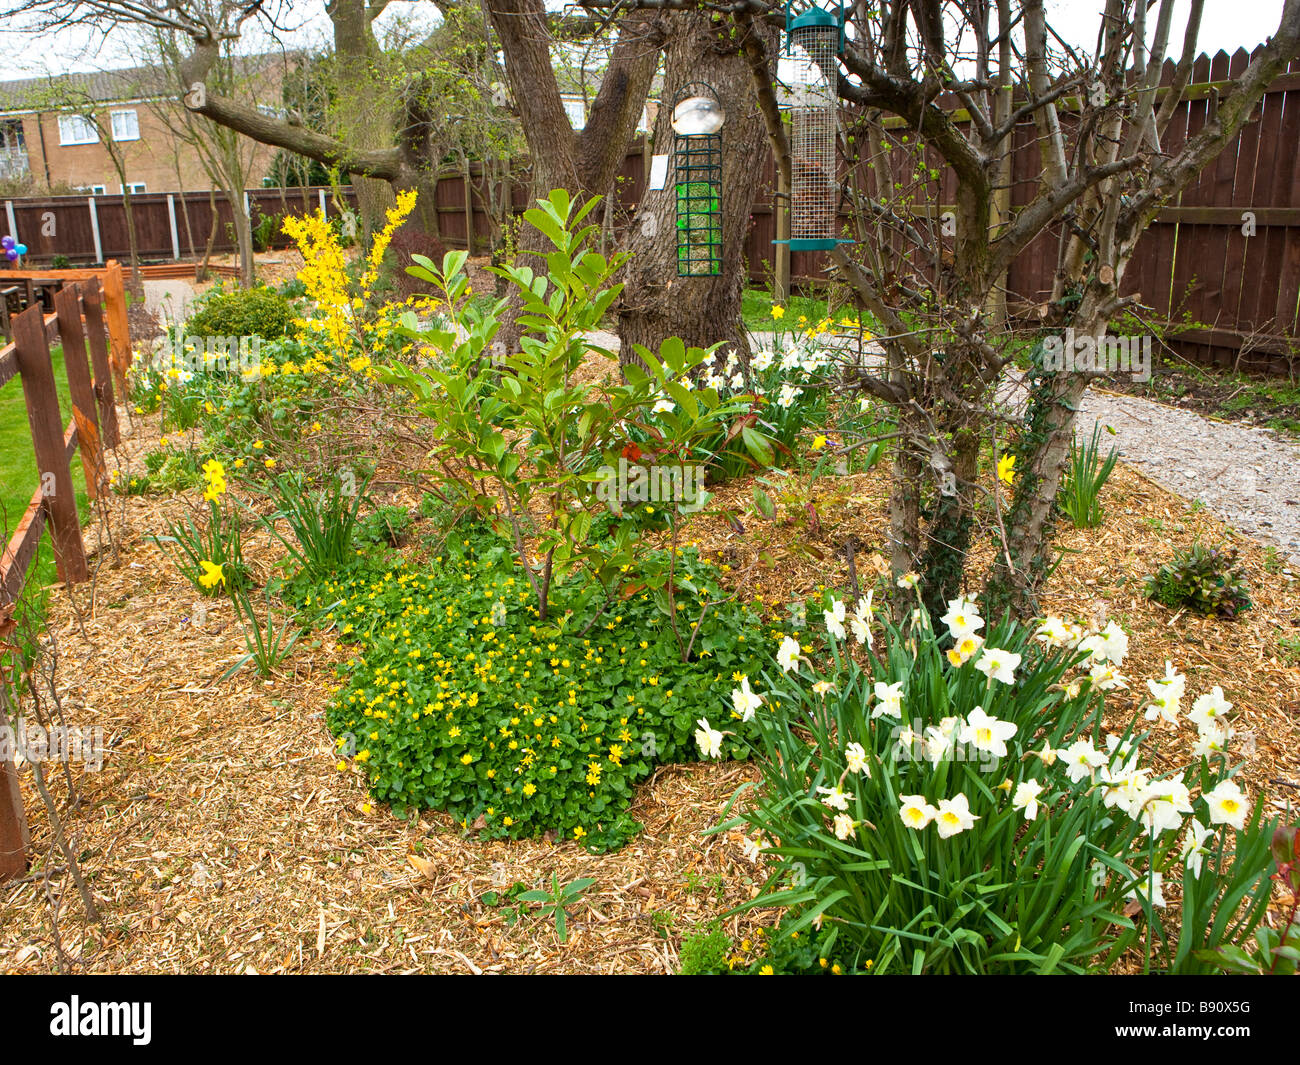 community garden with daffodils Stock Photo